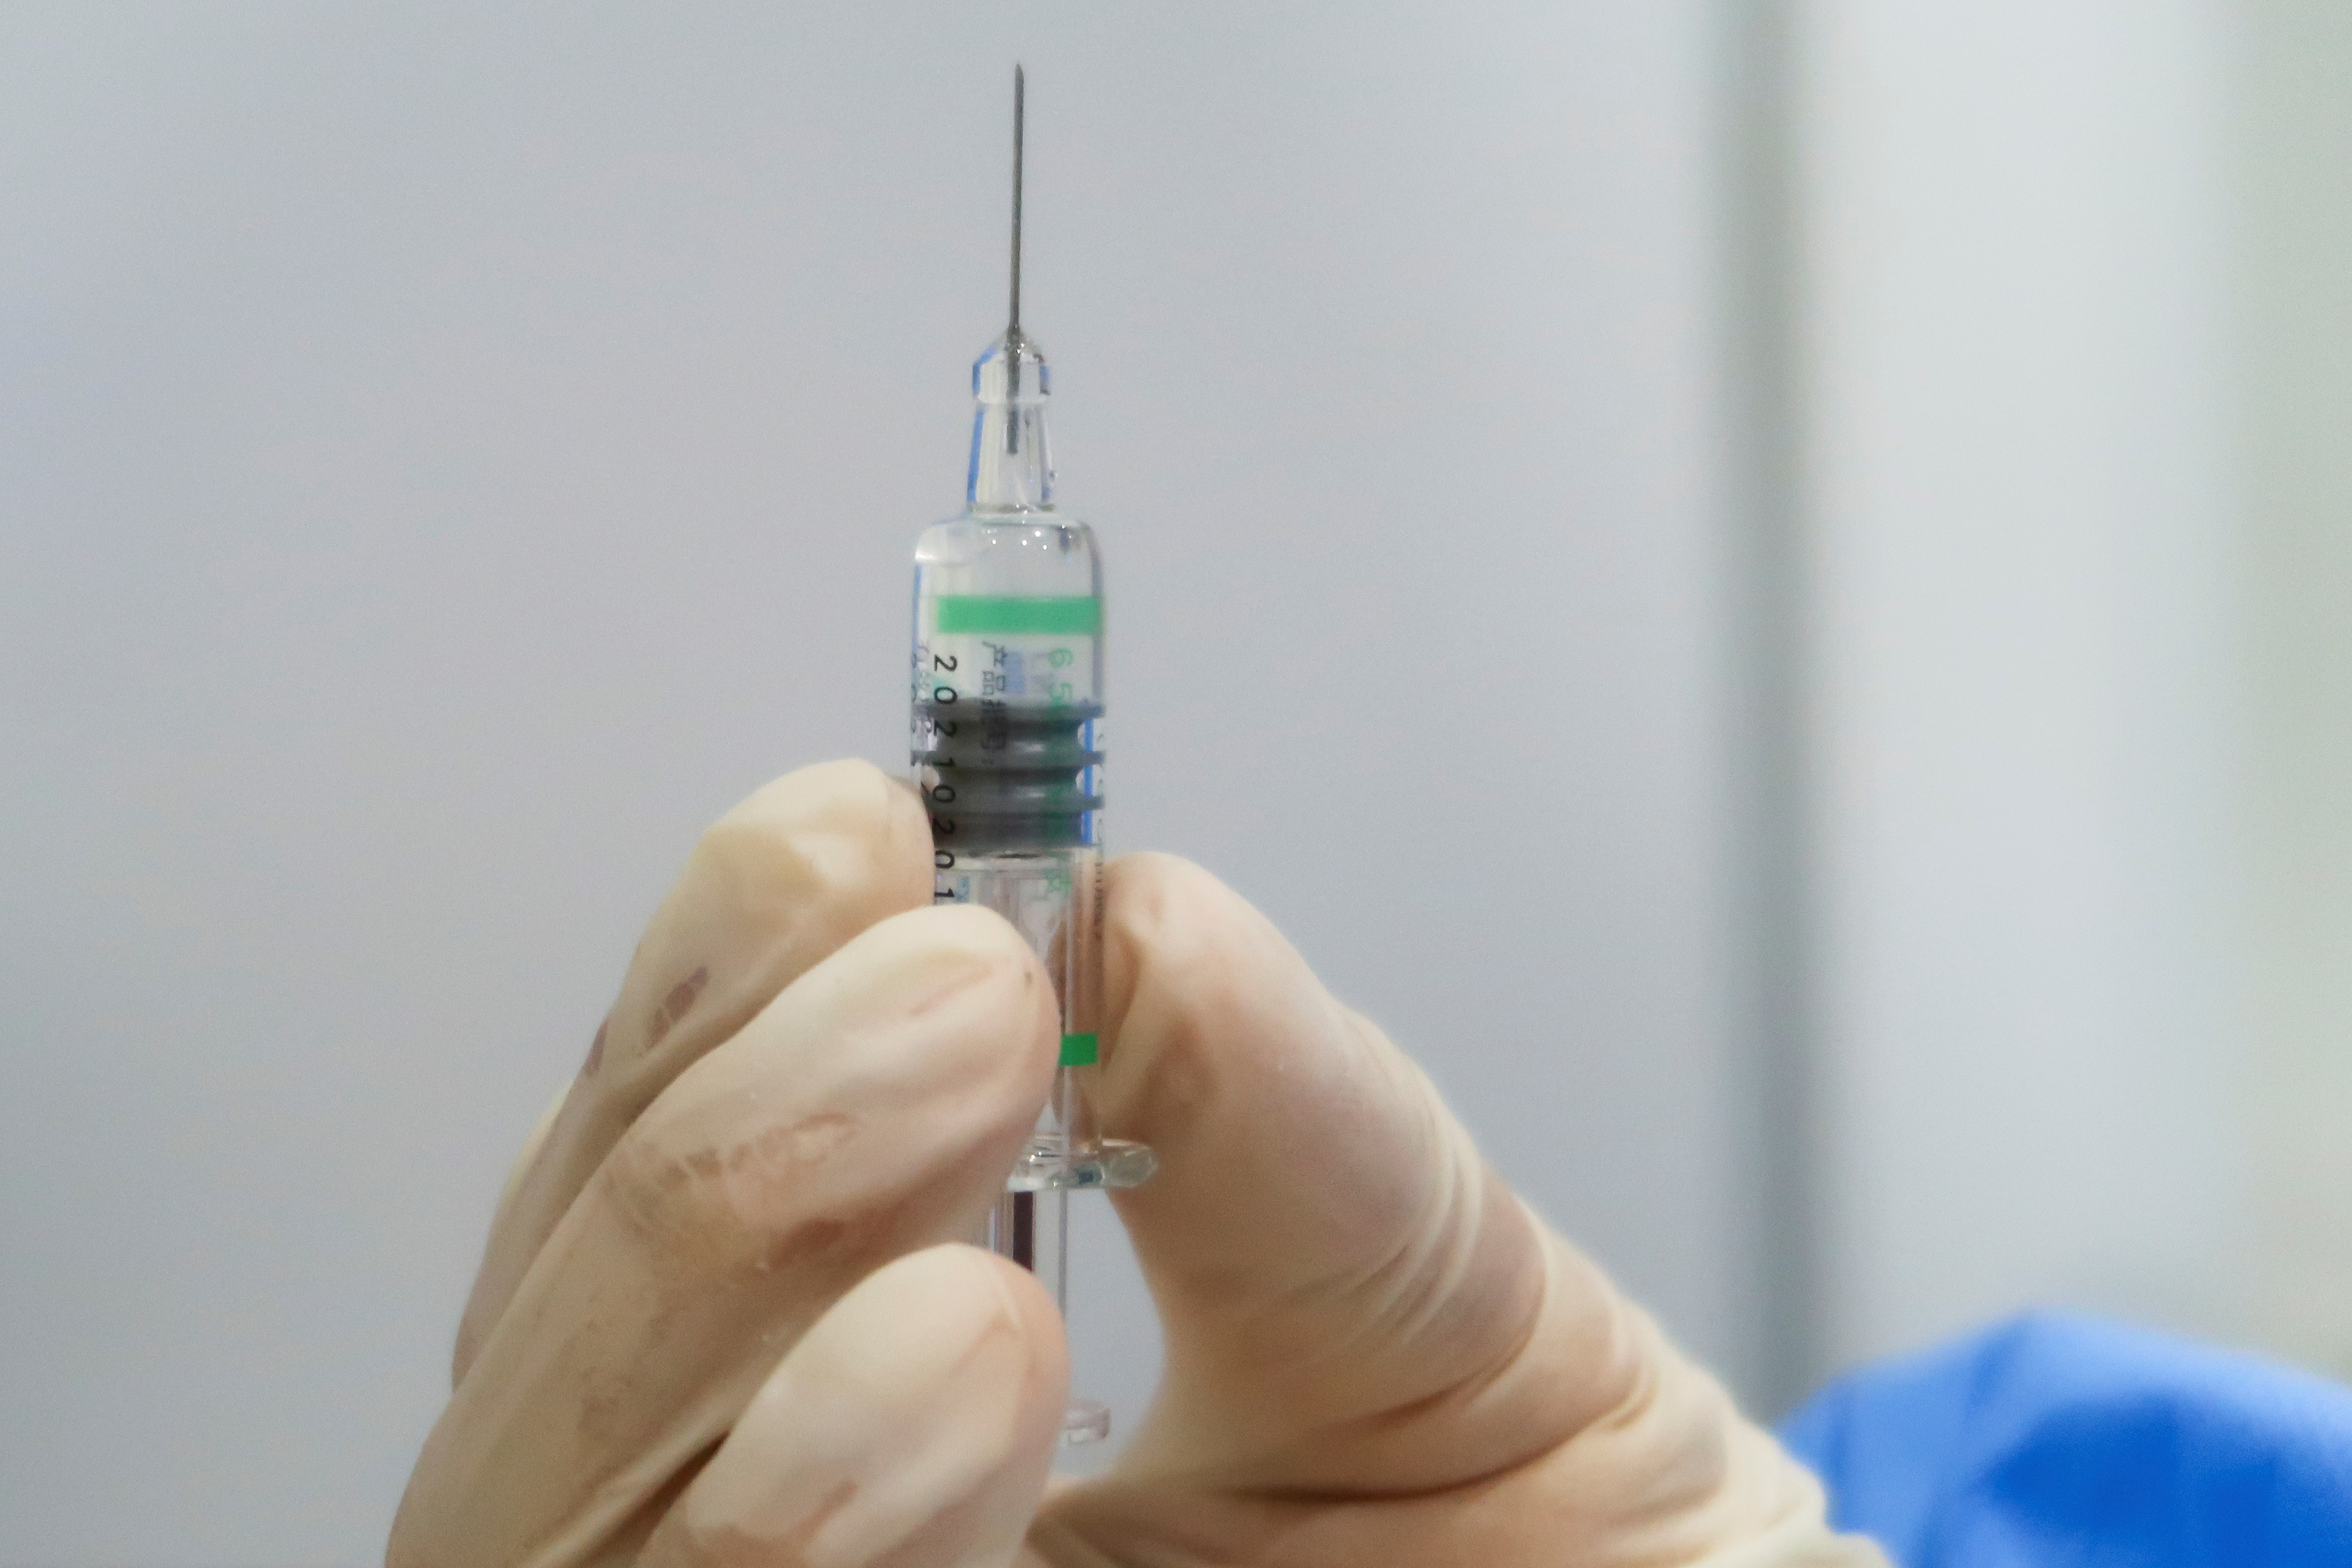 WHO expects decision on emergency list for Chinese vaccines soon